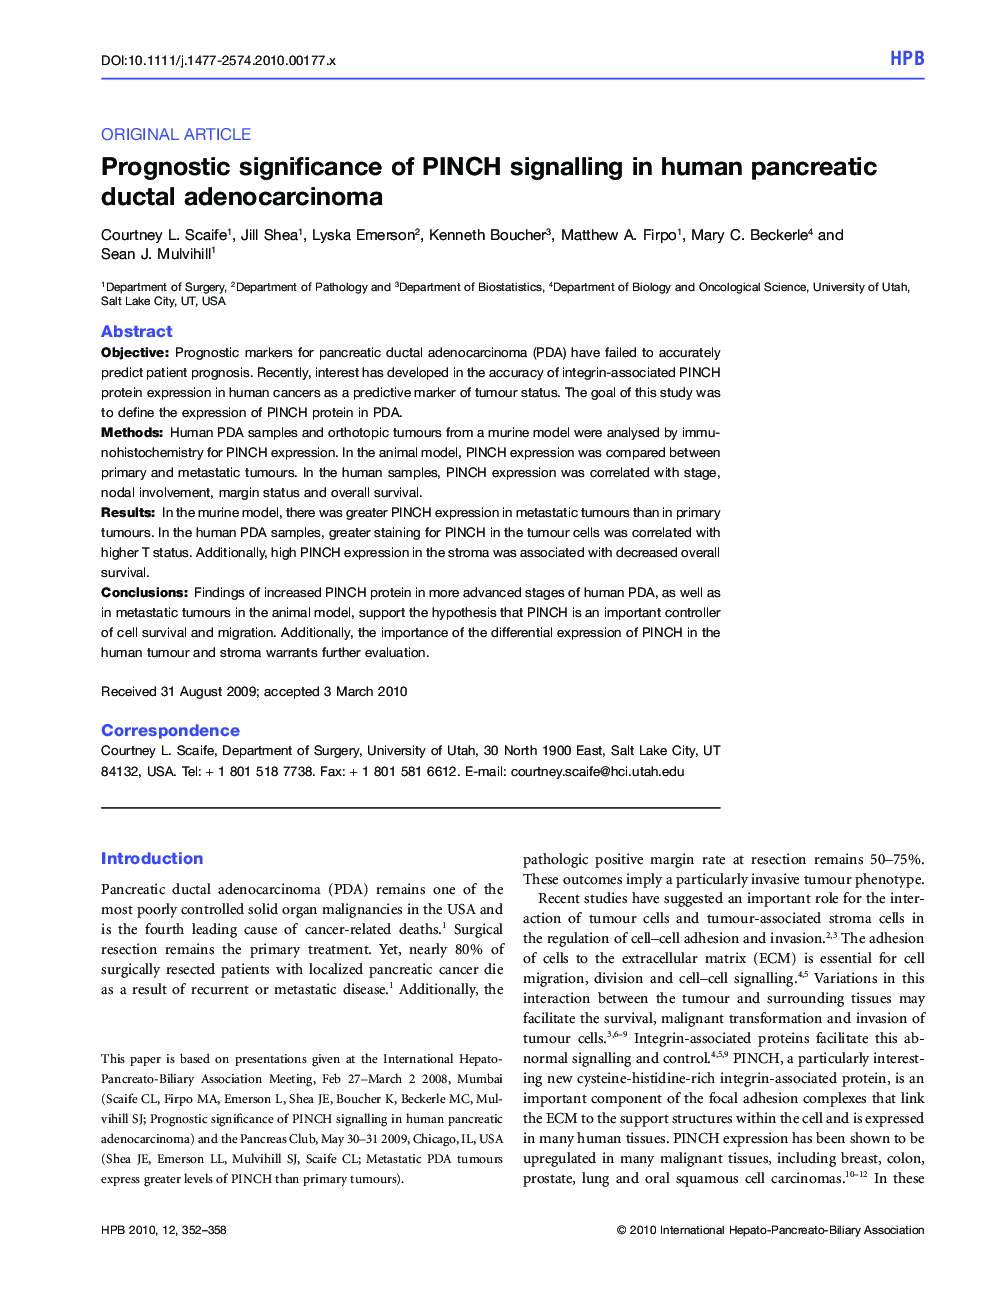 Prognostic significance of PINCH signalling in human pancreatic ductal adenocarcinoma